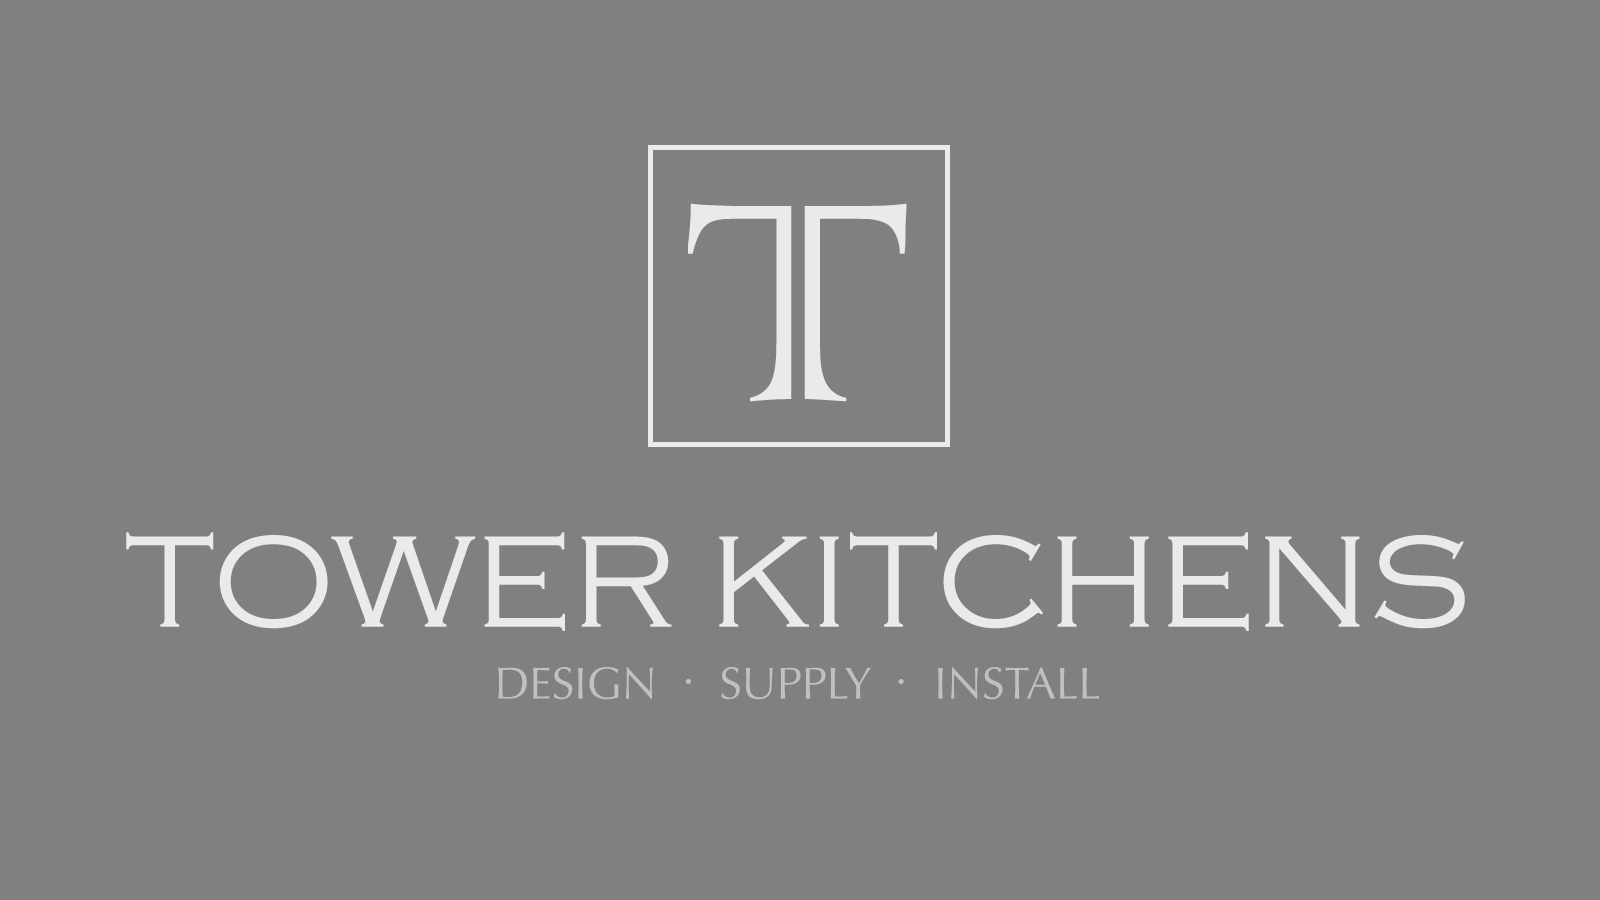 WE TOWER ABOVE OTHER KITCHENS COMPANIES